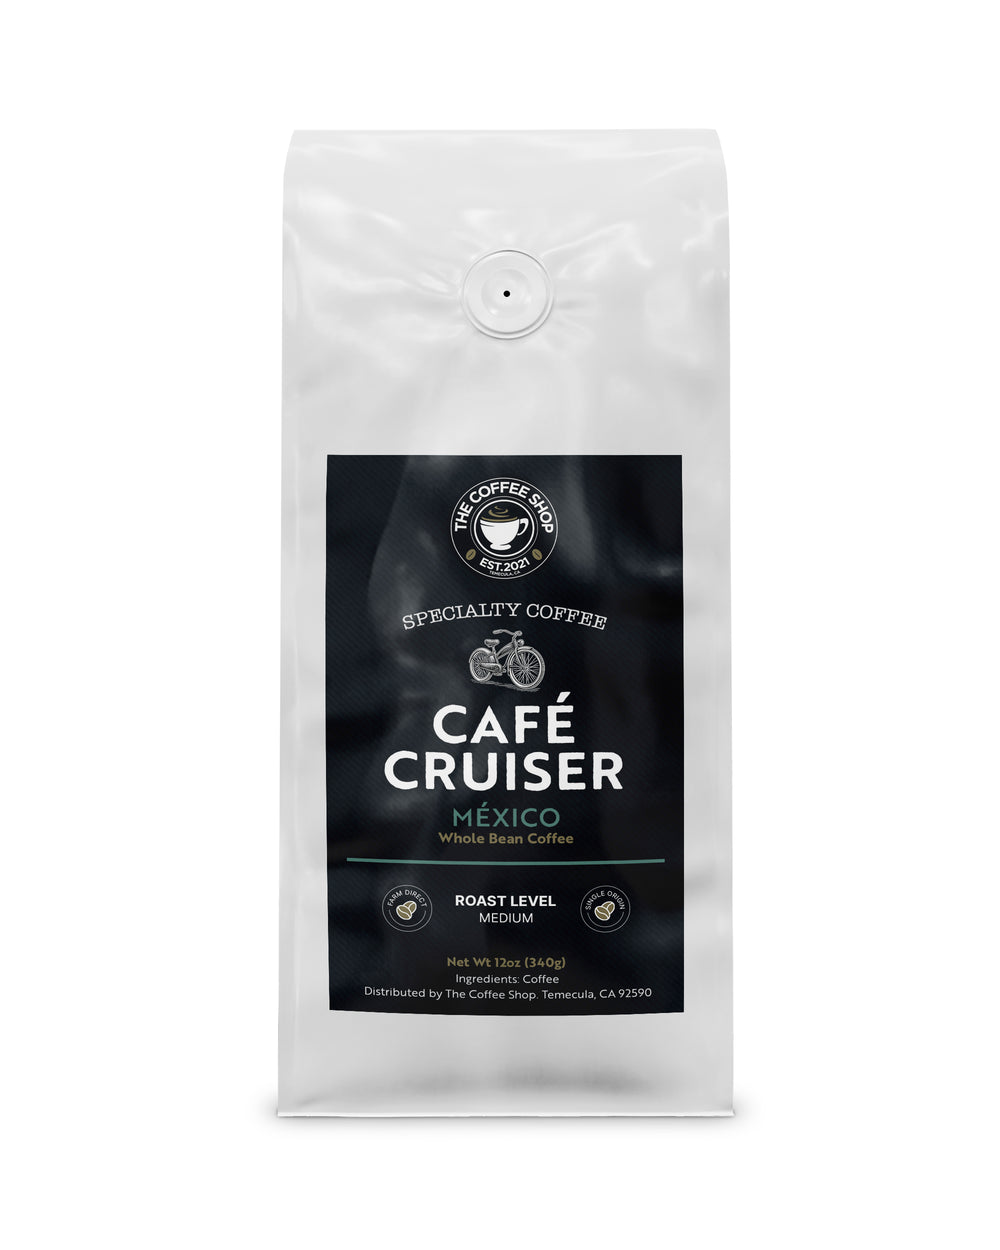 Cafe Cruiser Specialty Coffee 